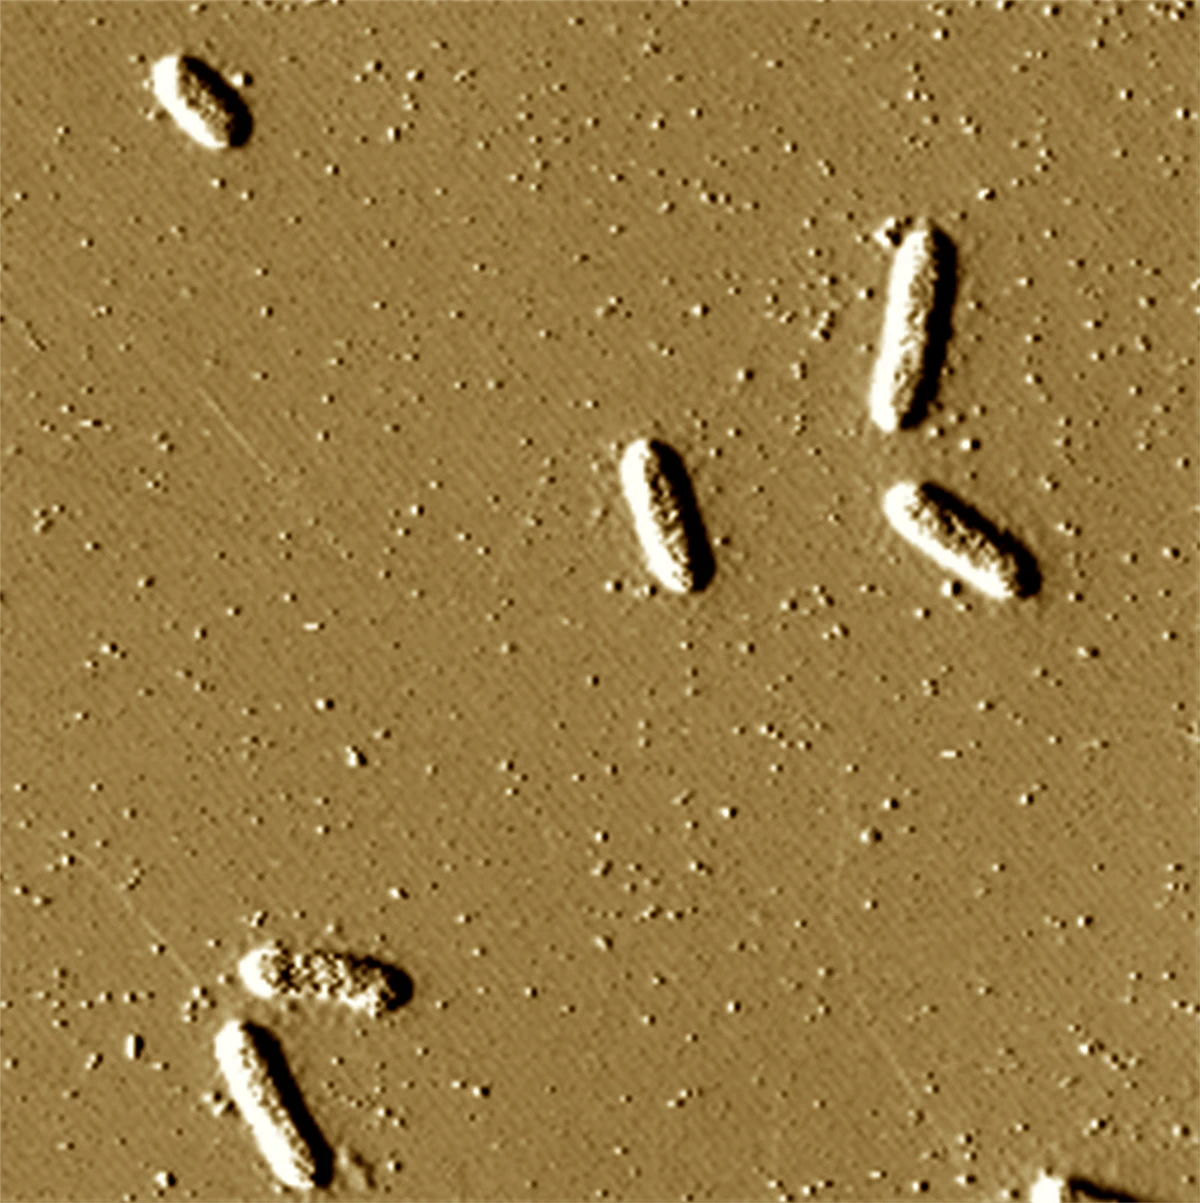 A micrograph shows rod-like Geobacter bacteria and the vesicles they release, seen as little dots throughout the image, which contain uranium the bacteria pull from their environment.